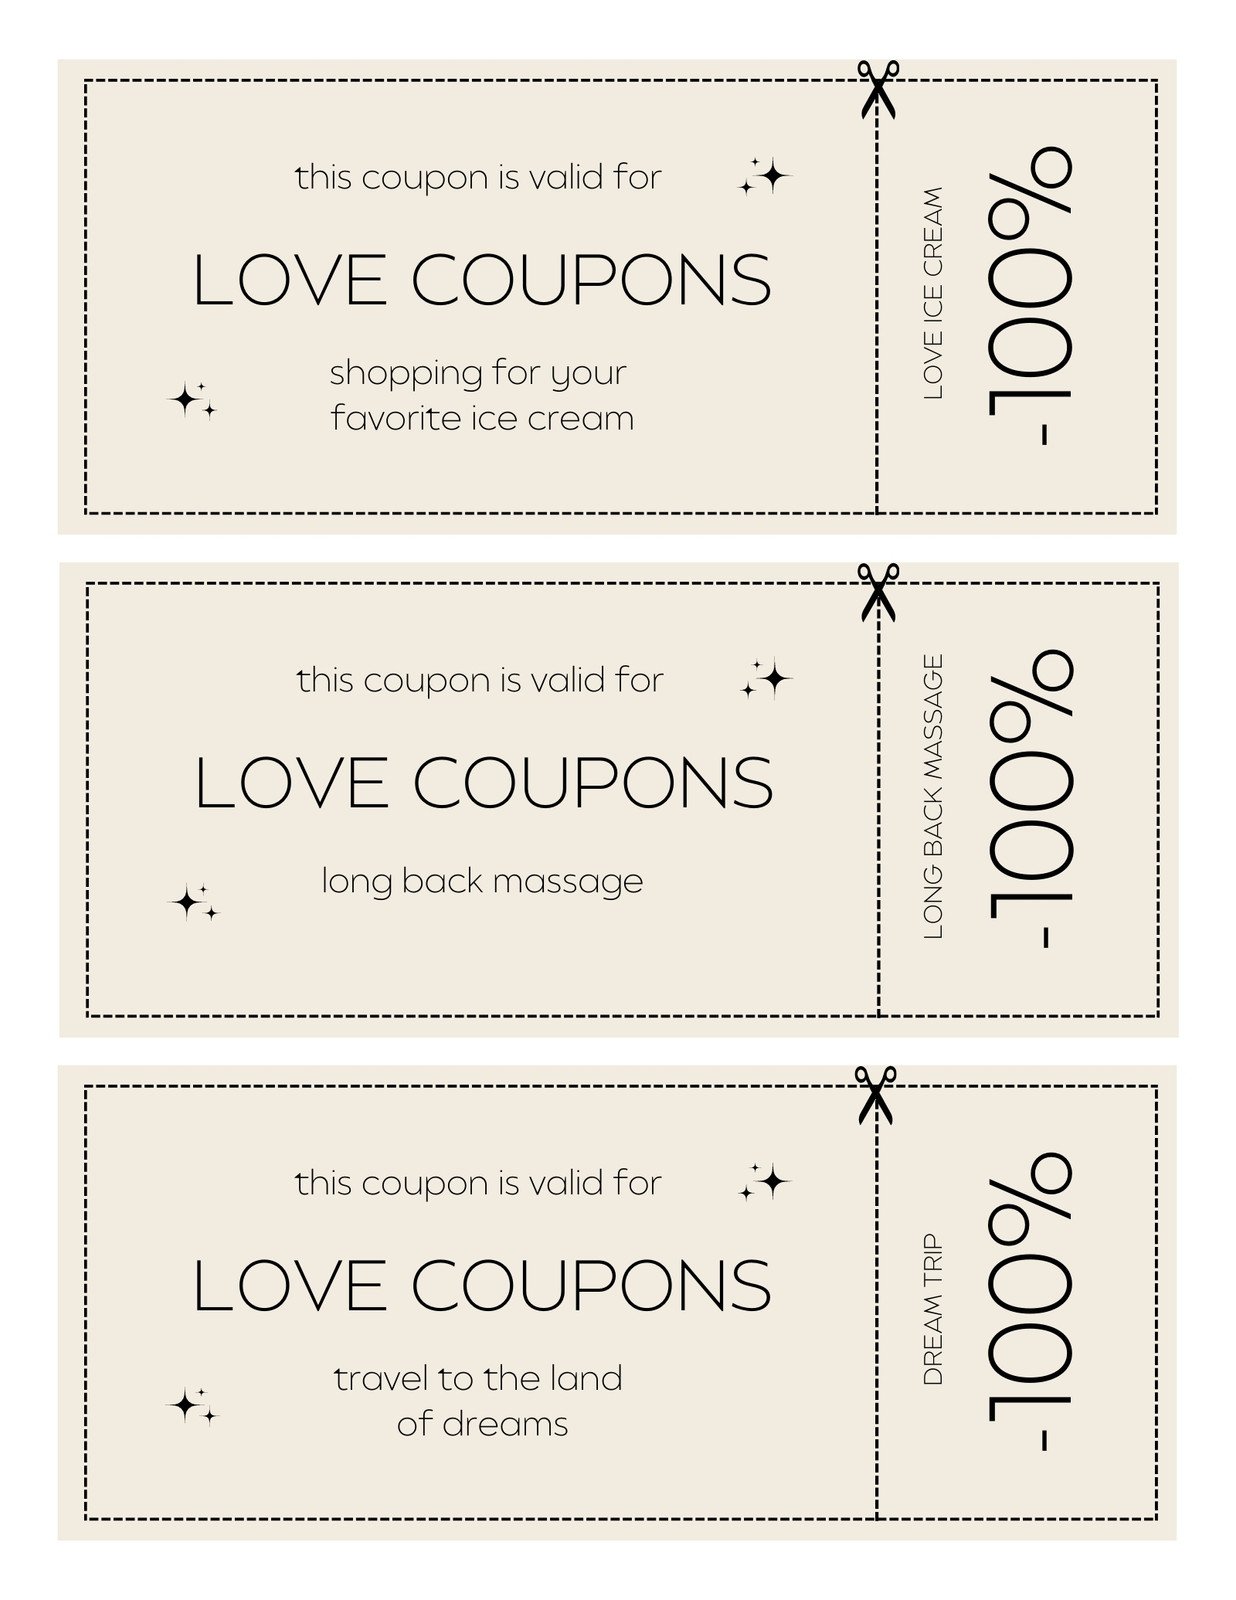 Couple coupon books -  France